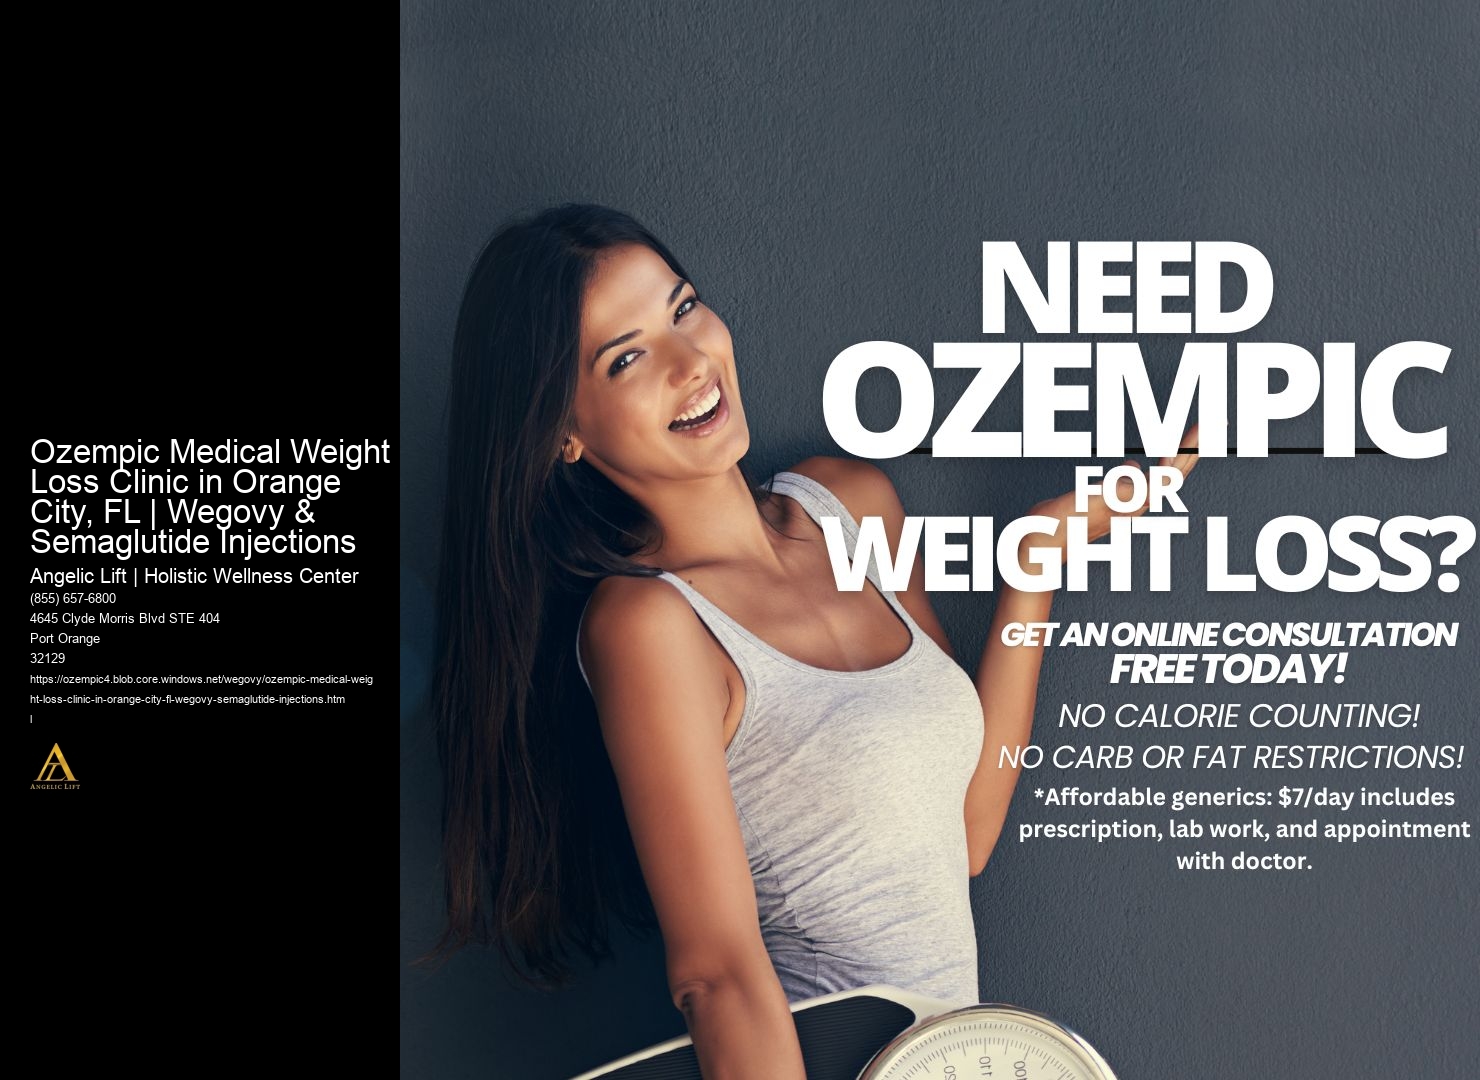 Ozempic Medical Weight Loss Clinic in Orange City, FL | Wegovy & Semaglutide Injections